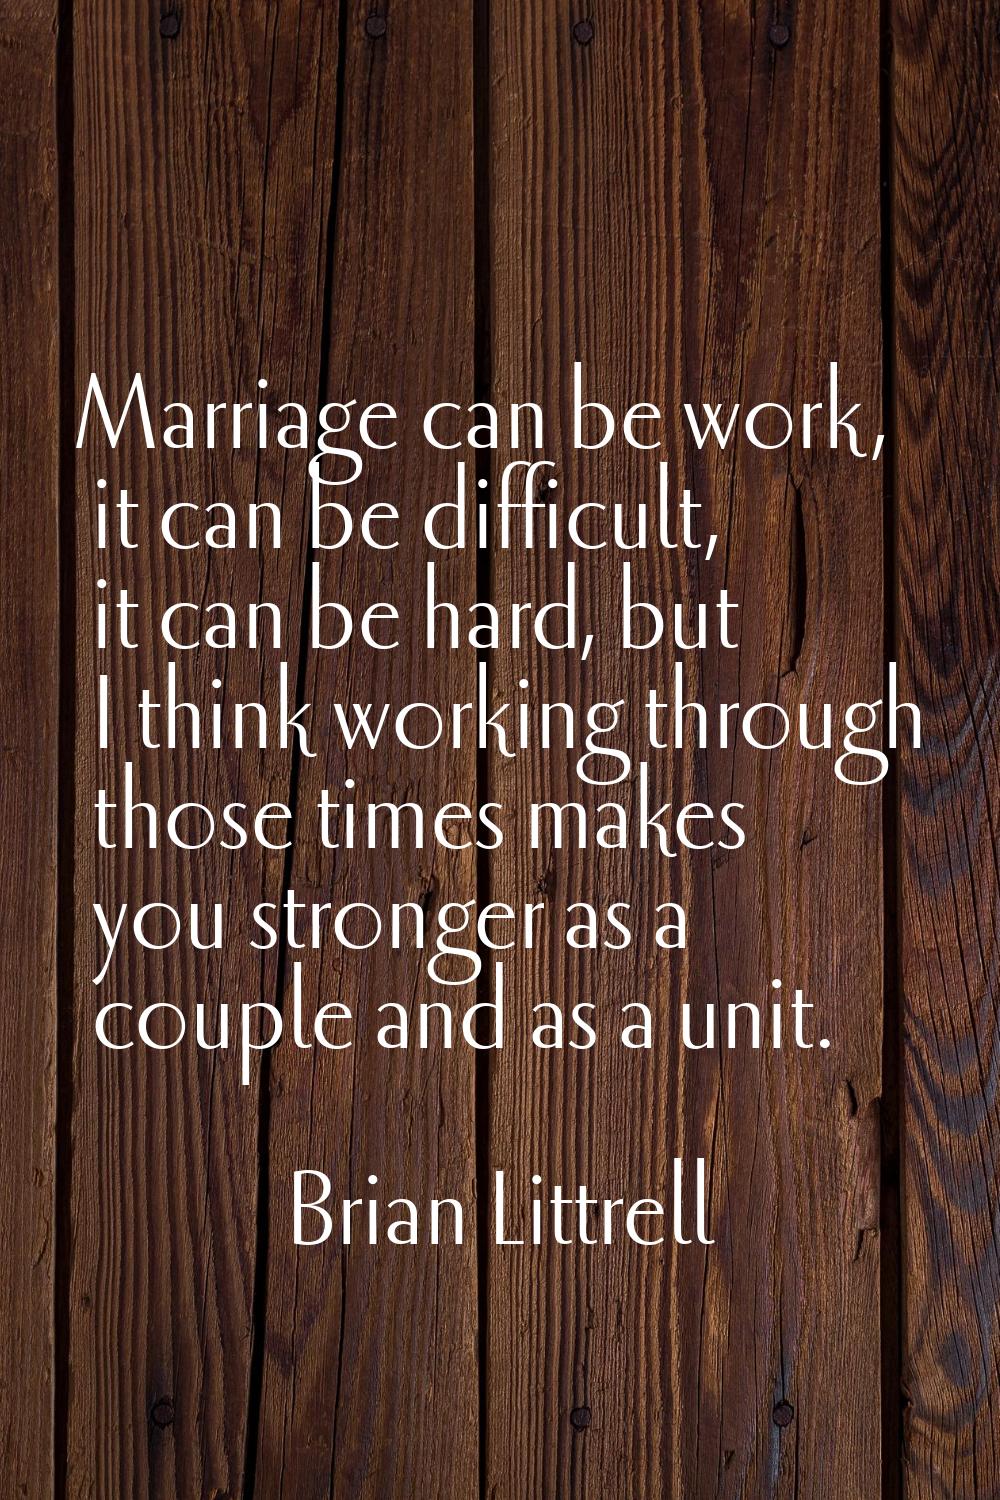 Marriage can be work, it can be difficult, it can be hard, but I think working through those times 